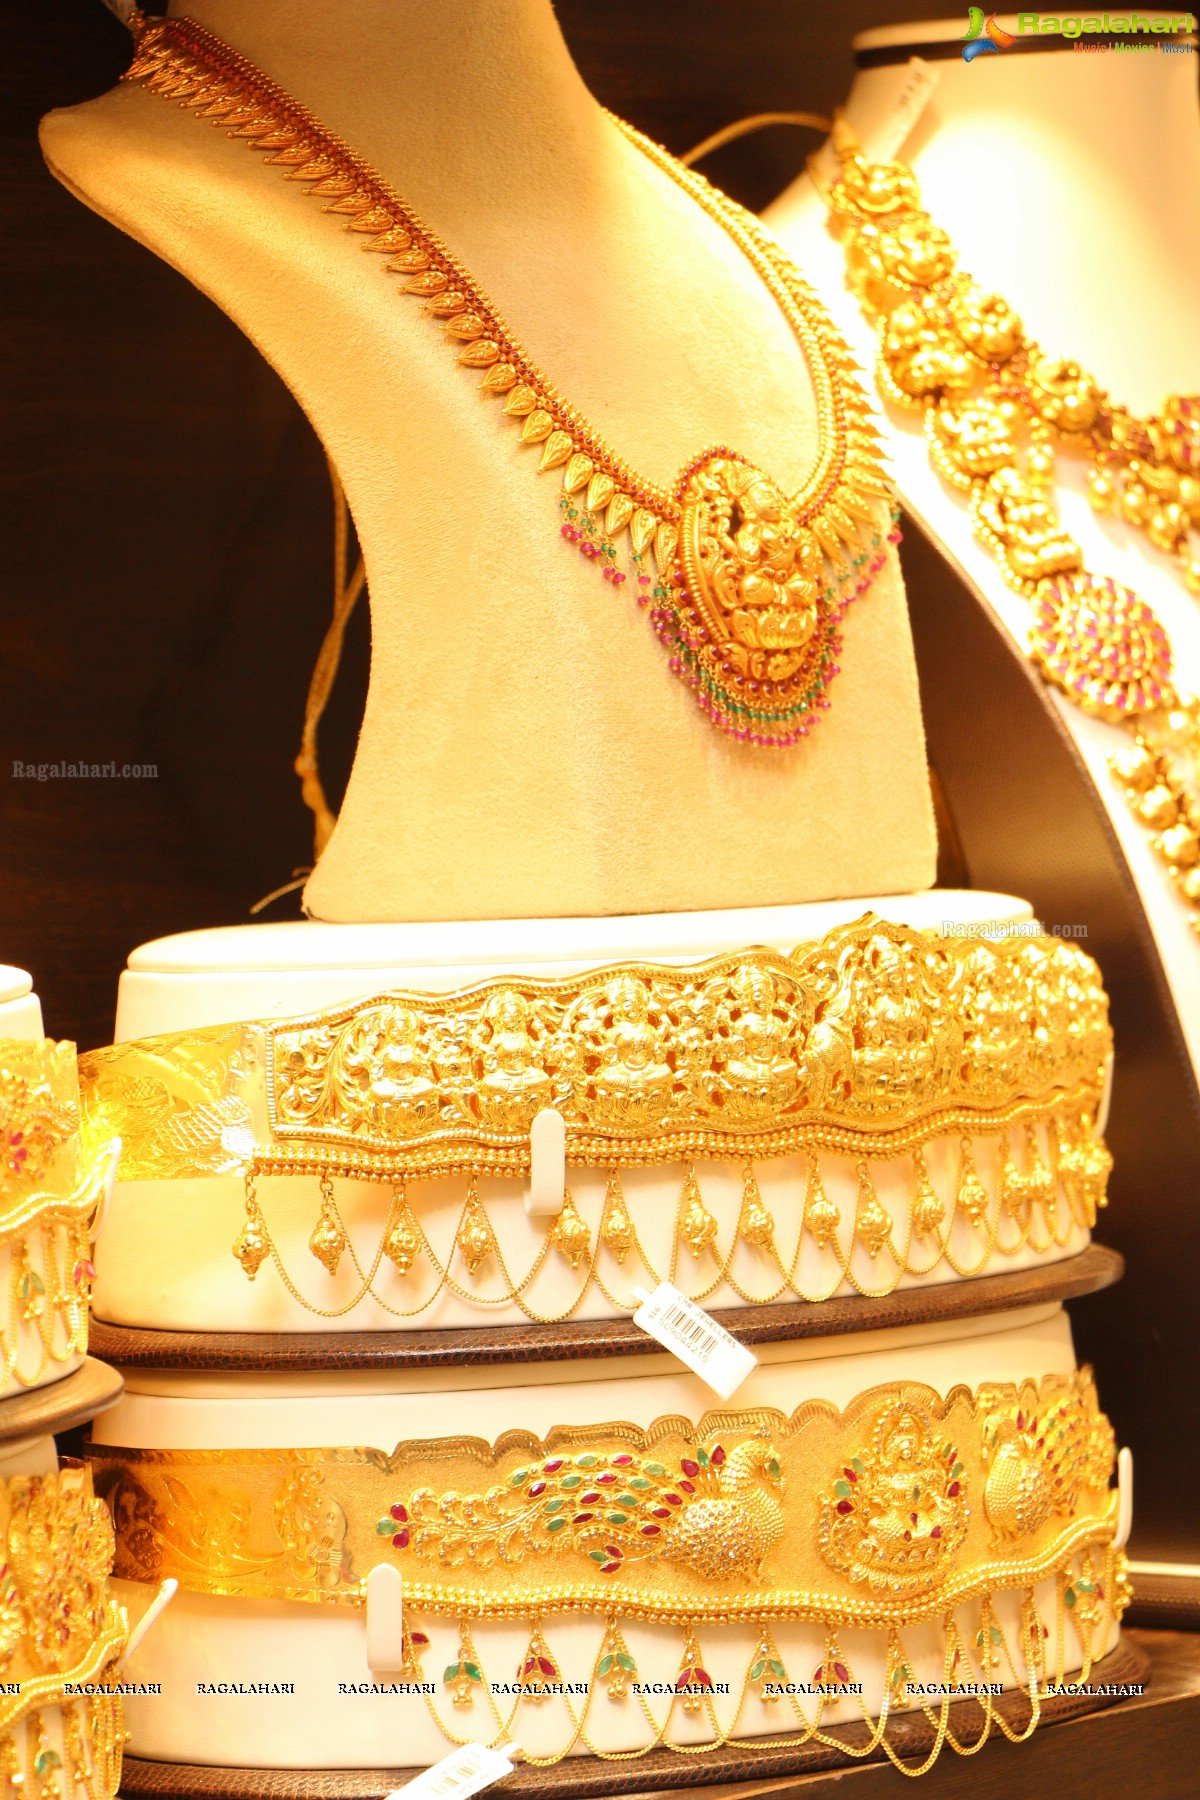 CMR Jewels - A Grand inauguration of Exclusive Jewellery Showroom at Kukatpally, Hyderabad